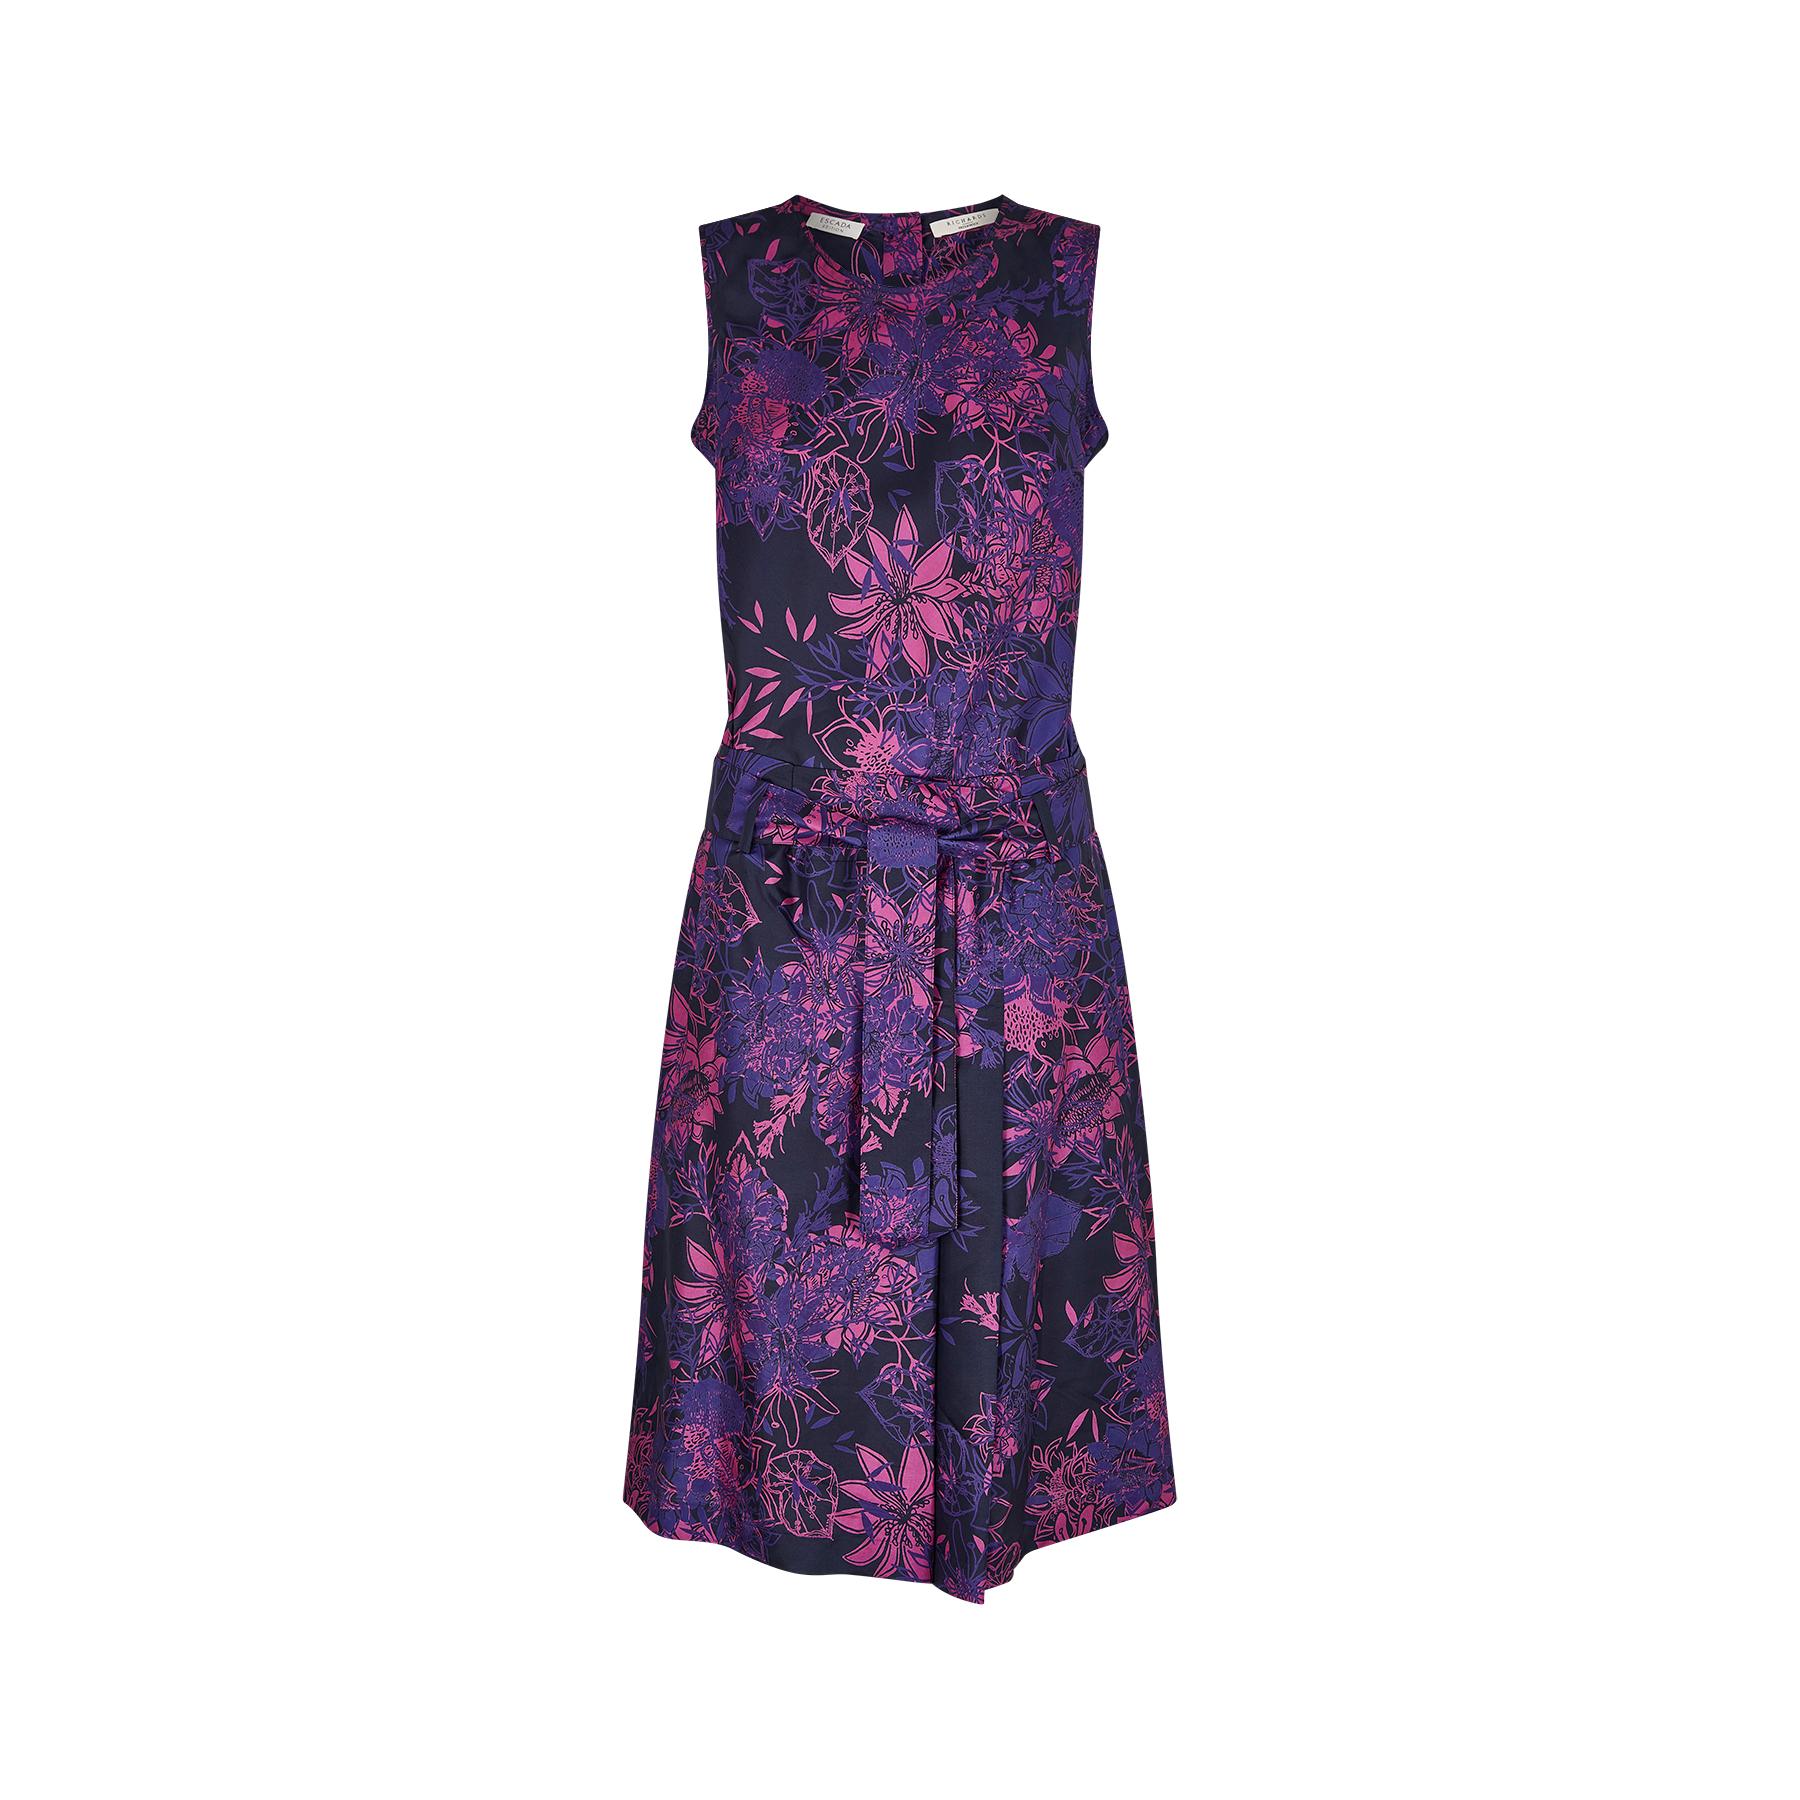 Sophisticated occasion dress from Escada, dating to the late 1990s or early 2000s. The dress has an abstract floral print in navy, purple and pink silk and is an unusual shirt-waister design designed to look like coordinating separates.  The back